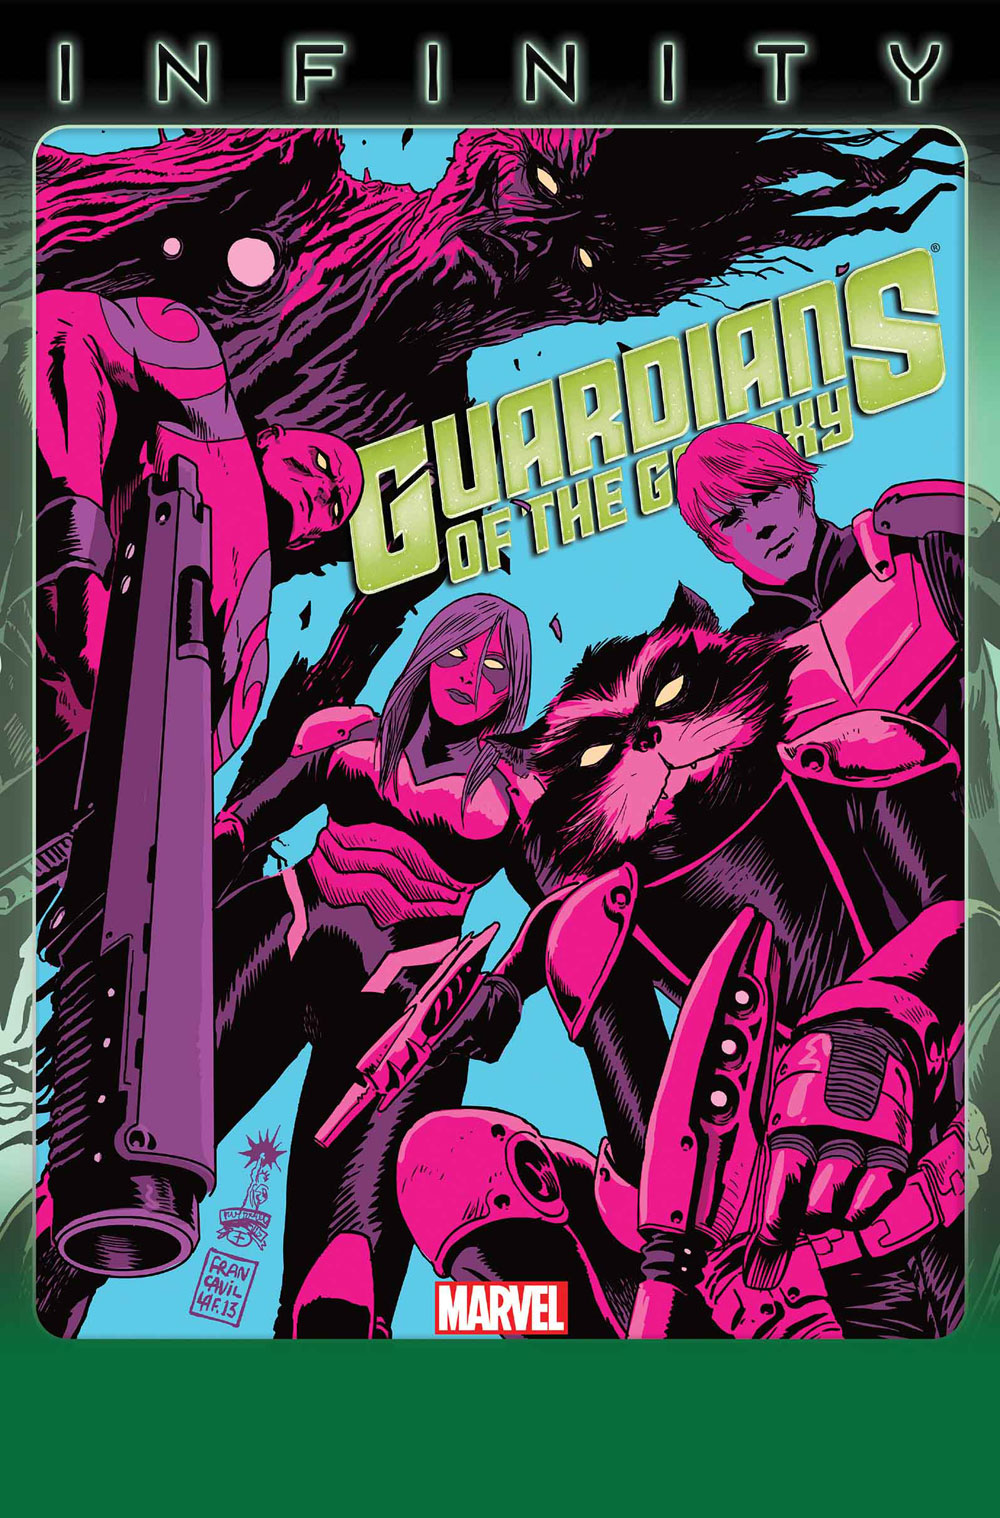 Guardians of the Galaxy (2013) #8